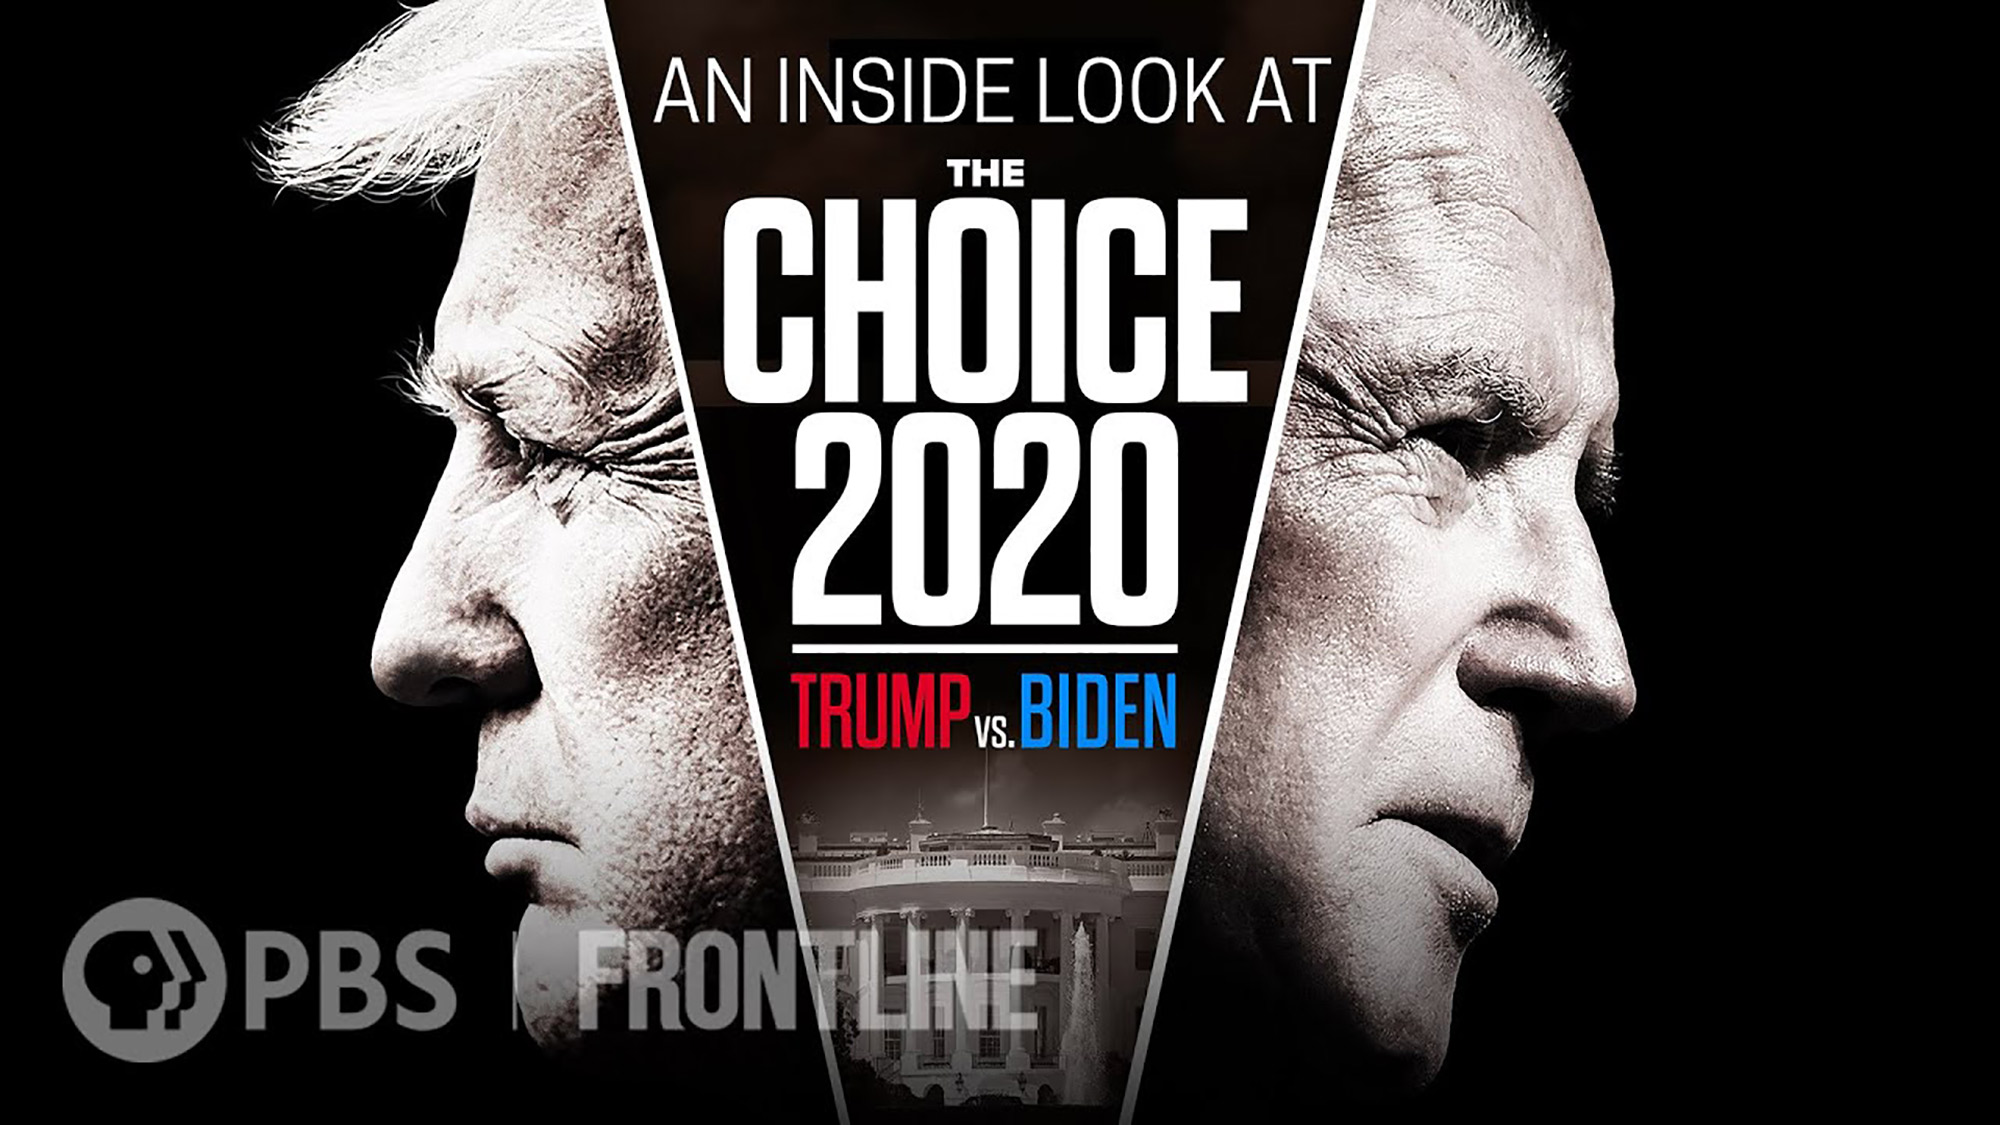 Poster for the Frontline program "The Choice 2020: Trump v. Biden." Poster shows black and white portraits of Trump and Biden facing in opposite directions. Poster reads "An Inside Look at The Choice 2020: Trump & Biden," with PBS and Frontline logos at the bottom.